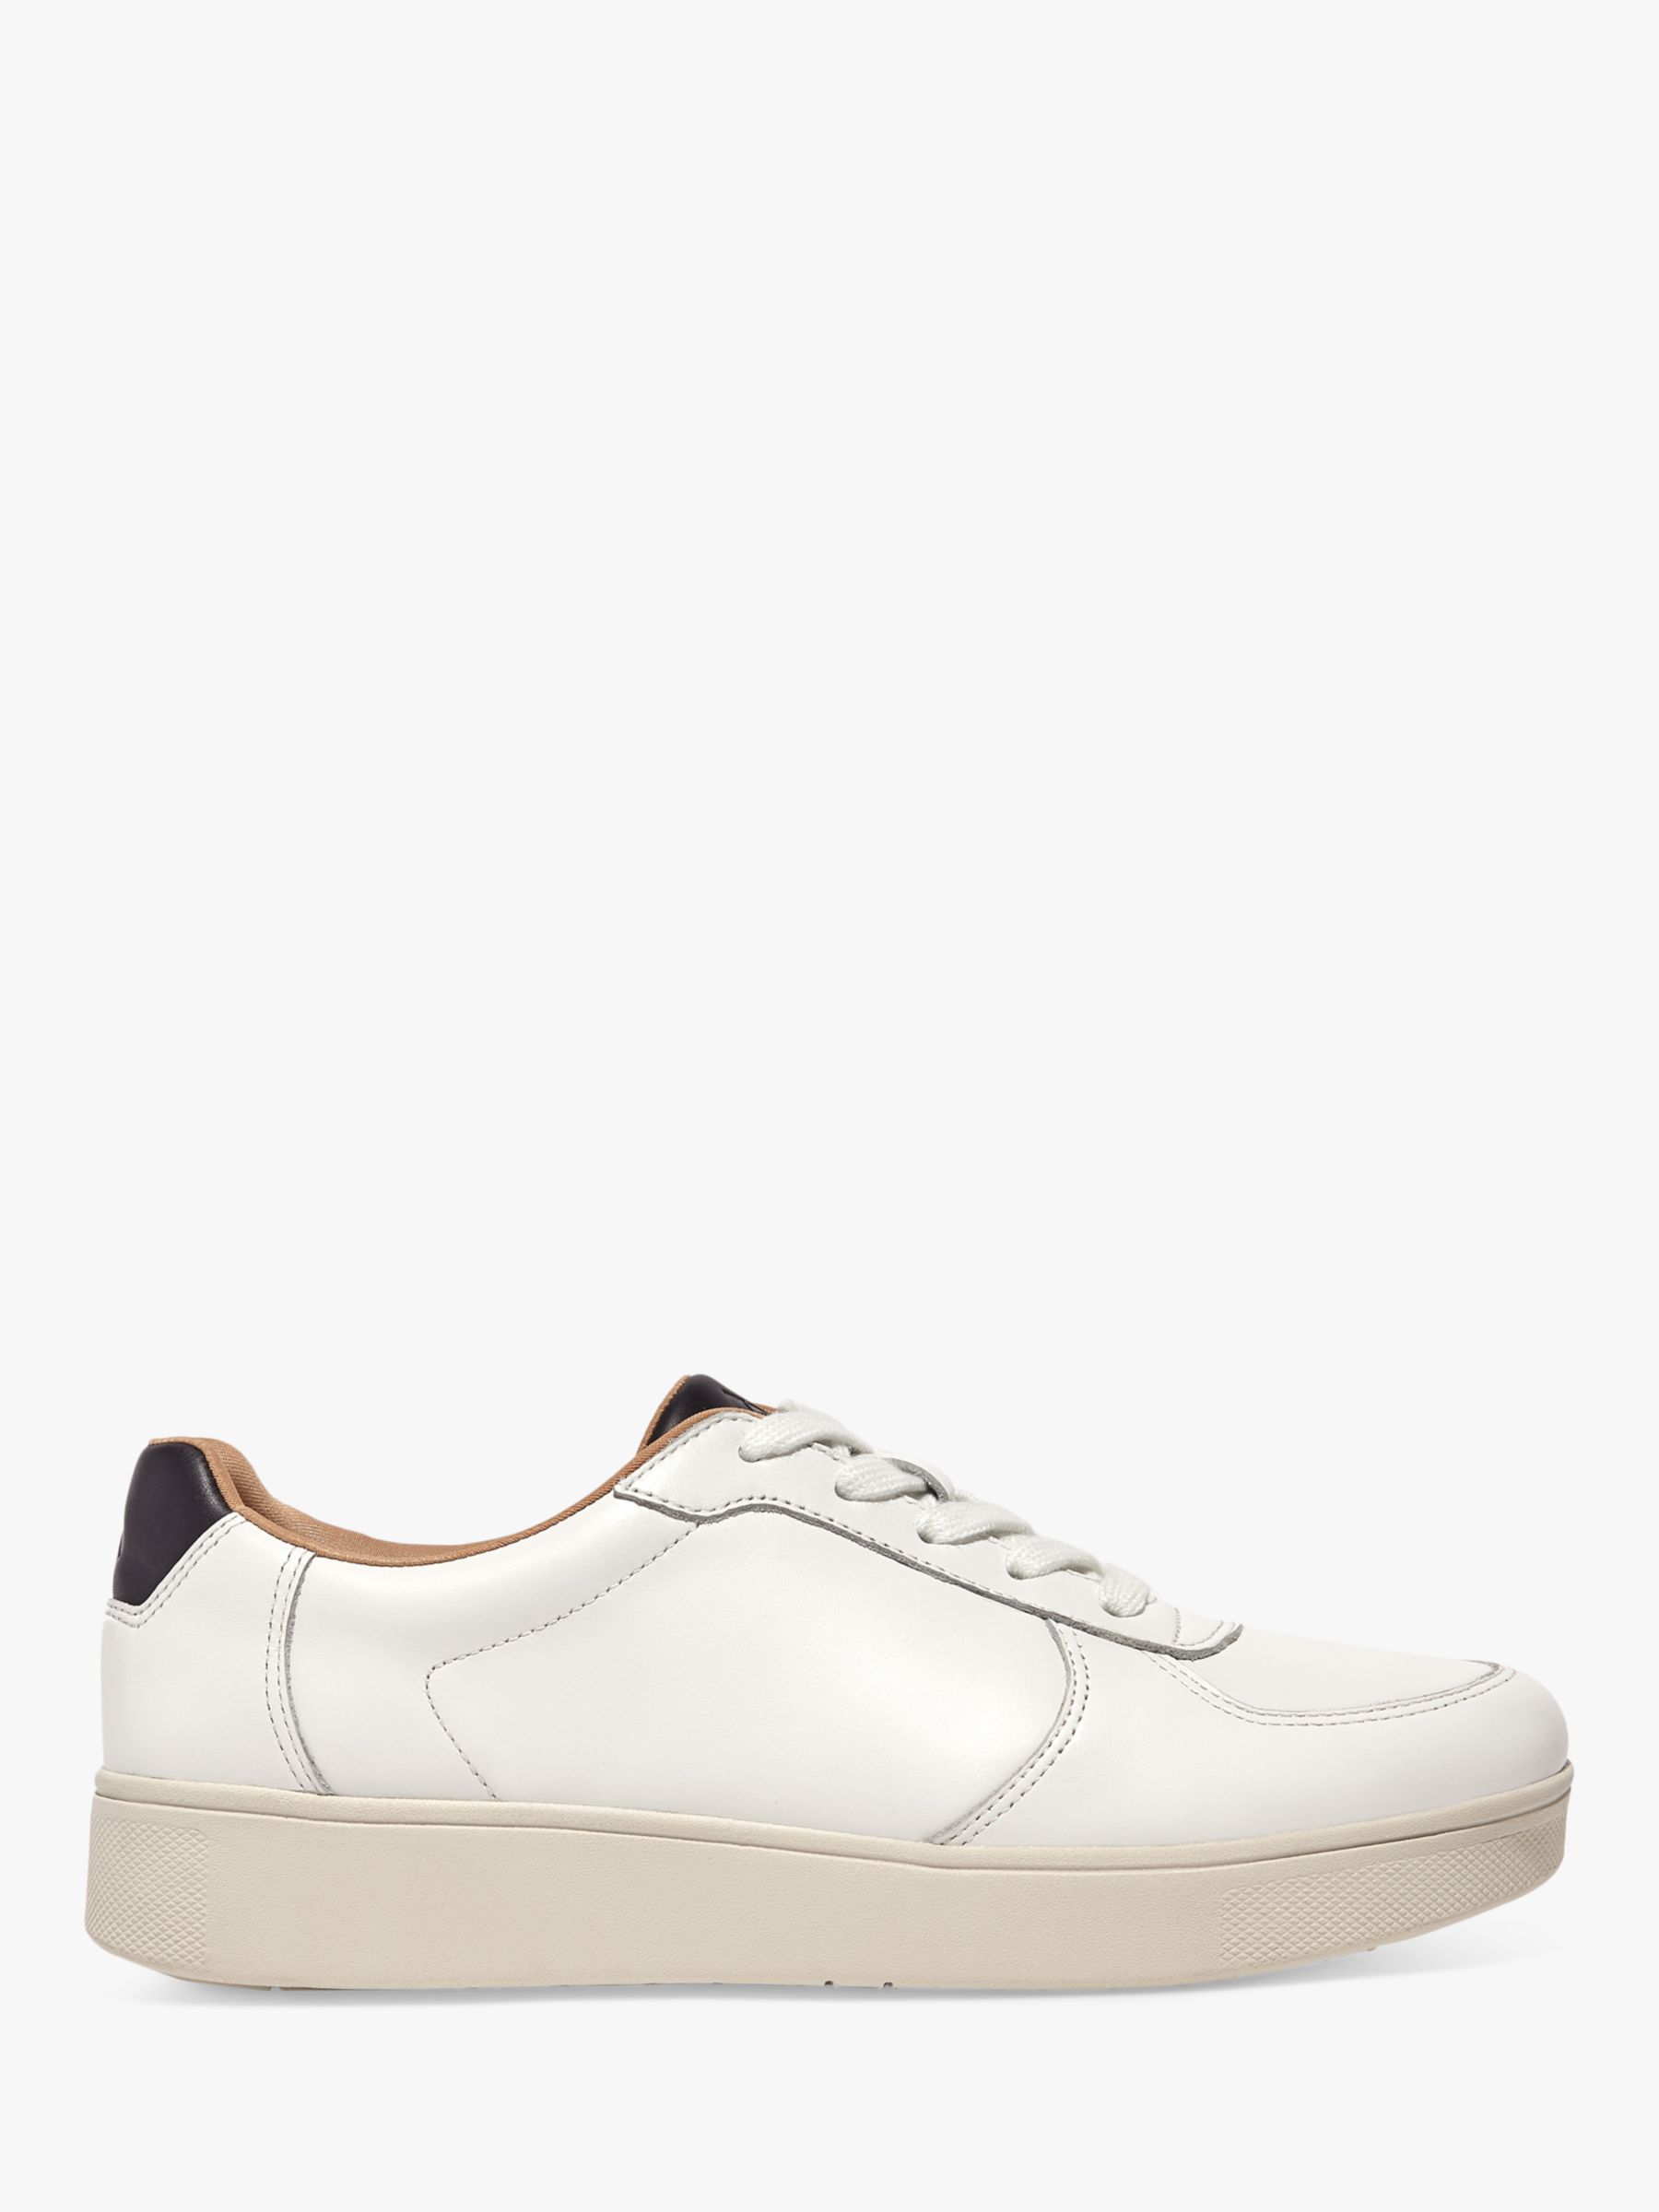 FitFlop Rally Leather Trainers, Urban White/Navy at John Lewis & Partners